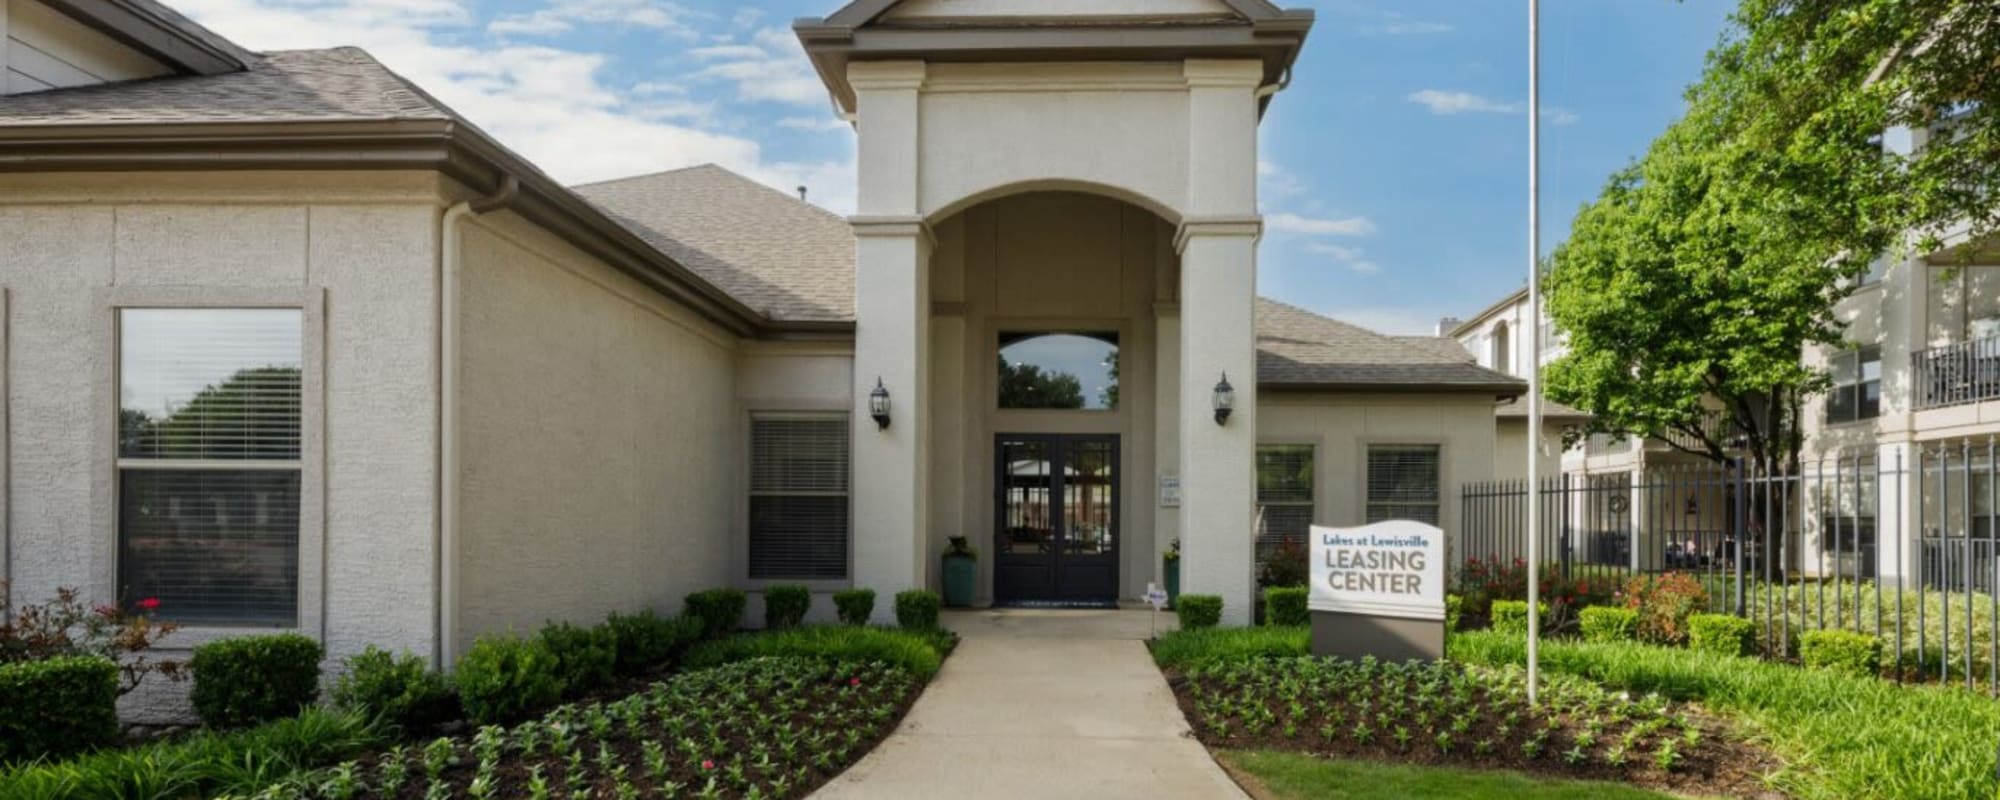 Community Center at Lakes At Lewisville in Lewisville, Texas 